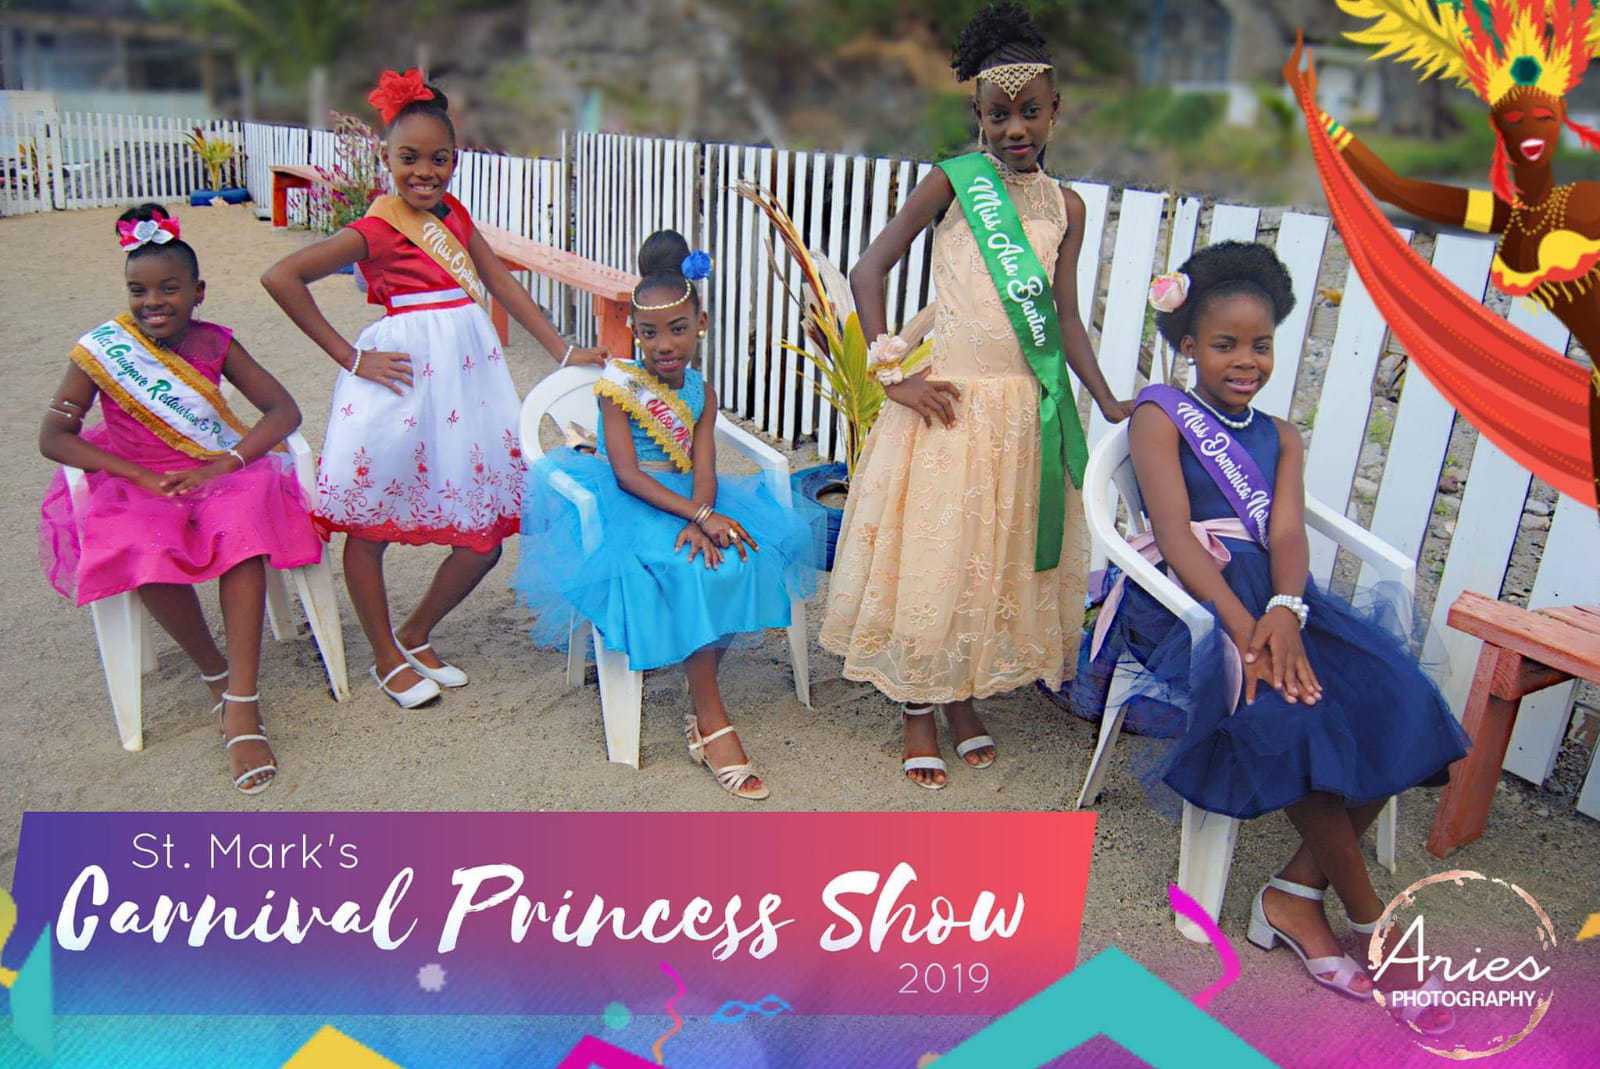  Five (5) Contestants to Compete in St. Mark’s Princess Show